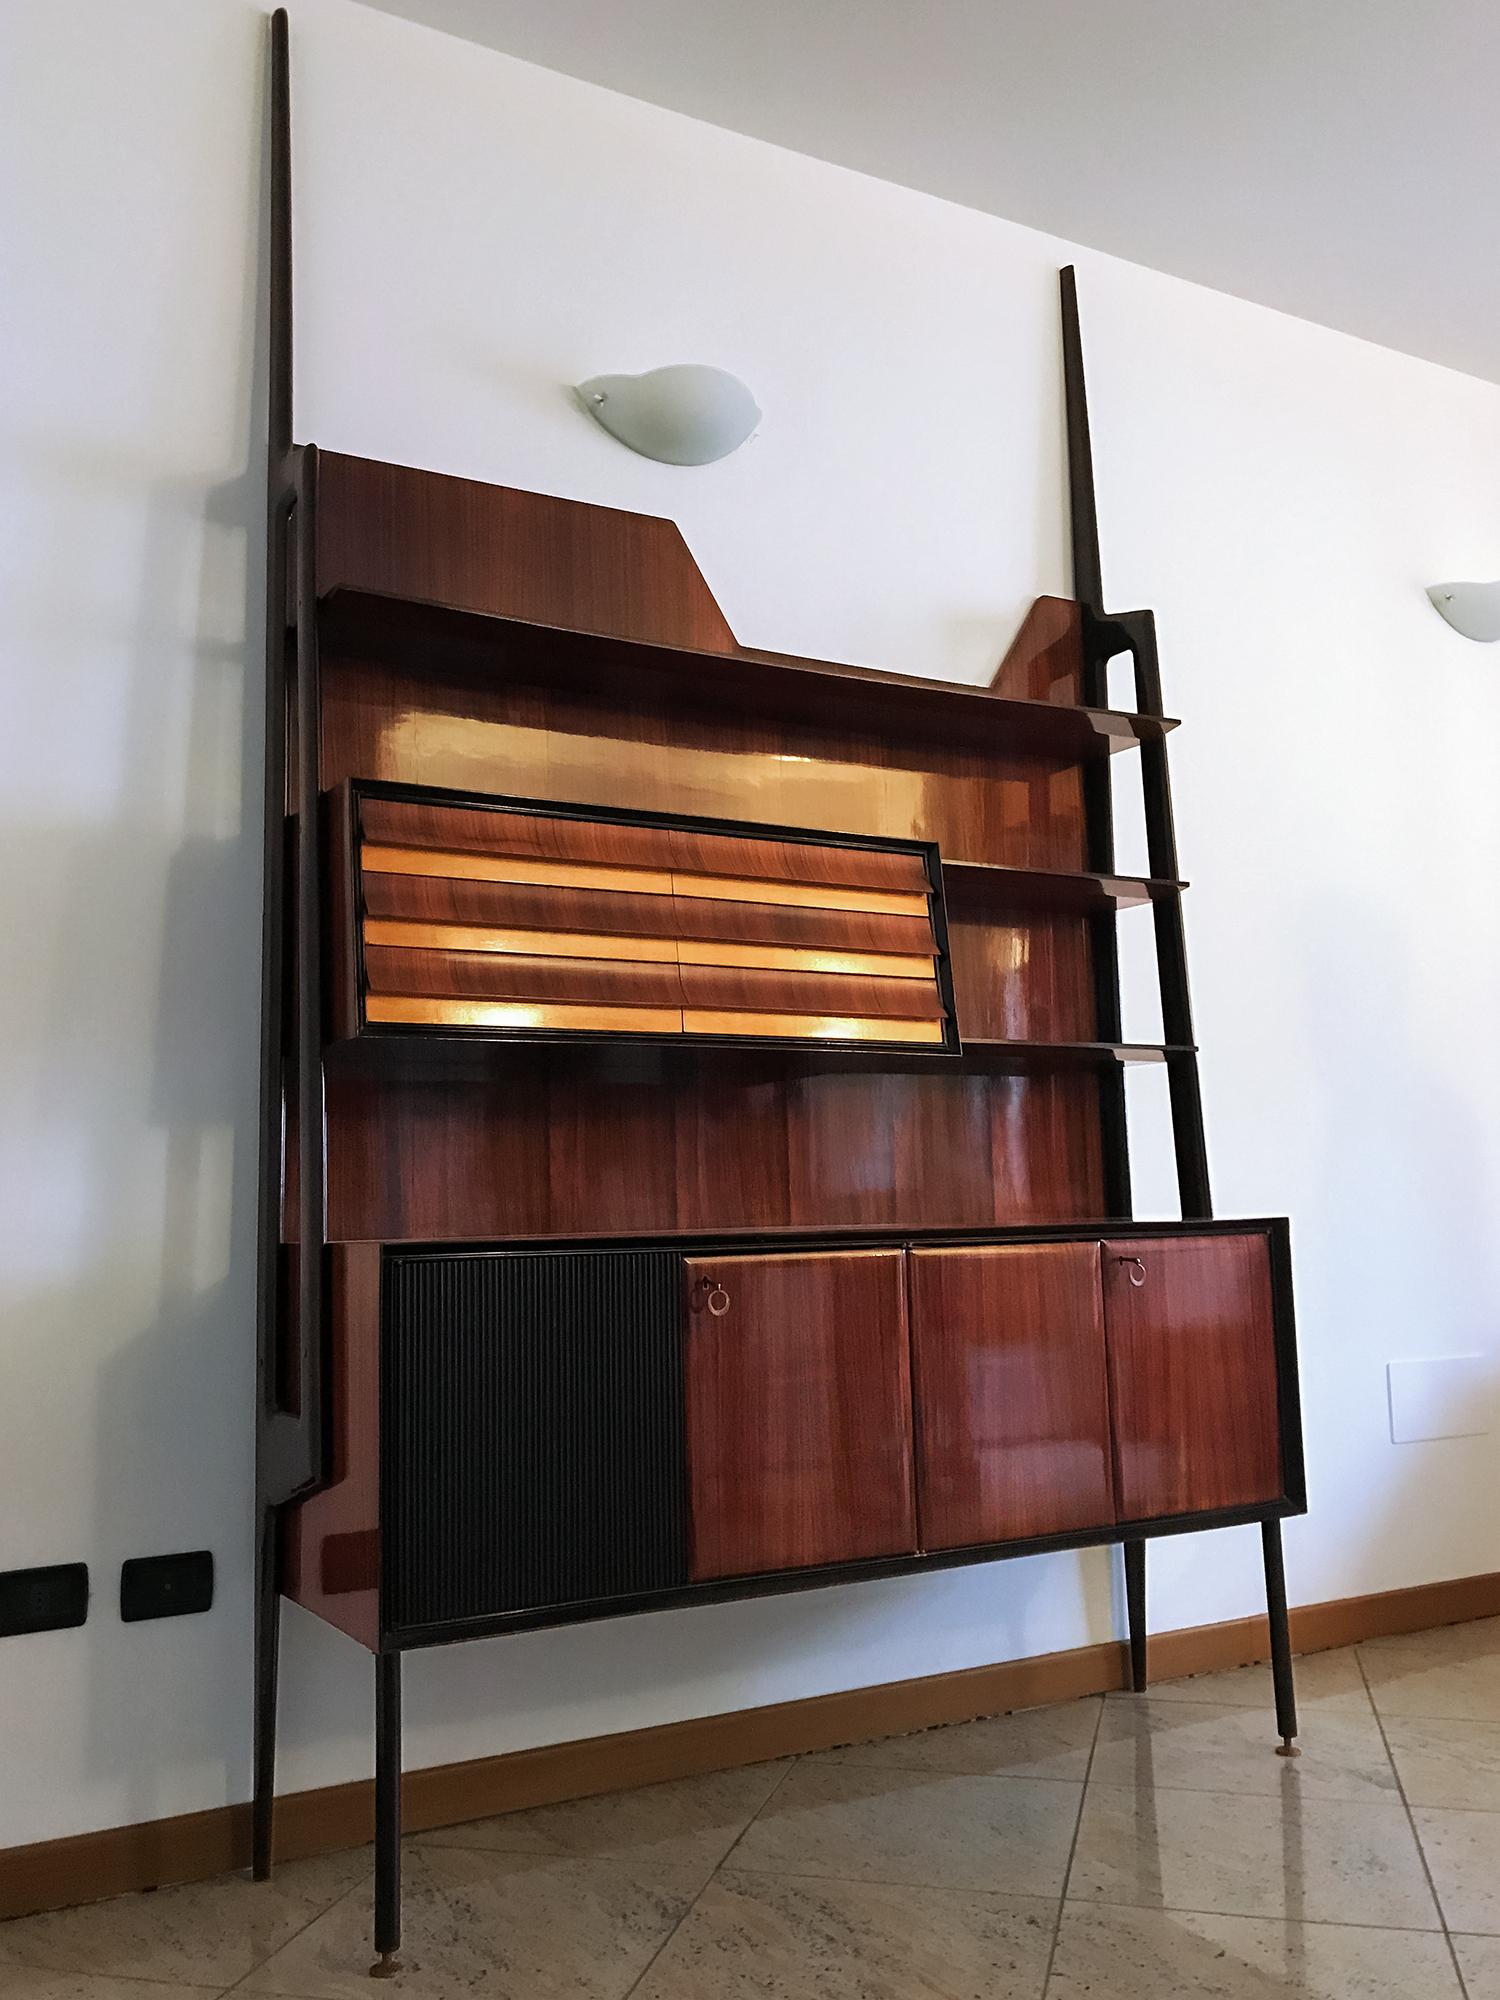 Stunning Italian self-standing bookcase designed by Vittorio Dassi in the 1950s.
The structure is of veneered rosewood, equipped with drawers, and supported by uprights with the form of long lances in ebony stained wood.
The item is in good